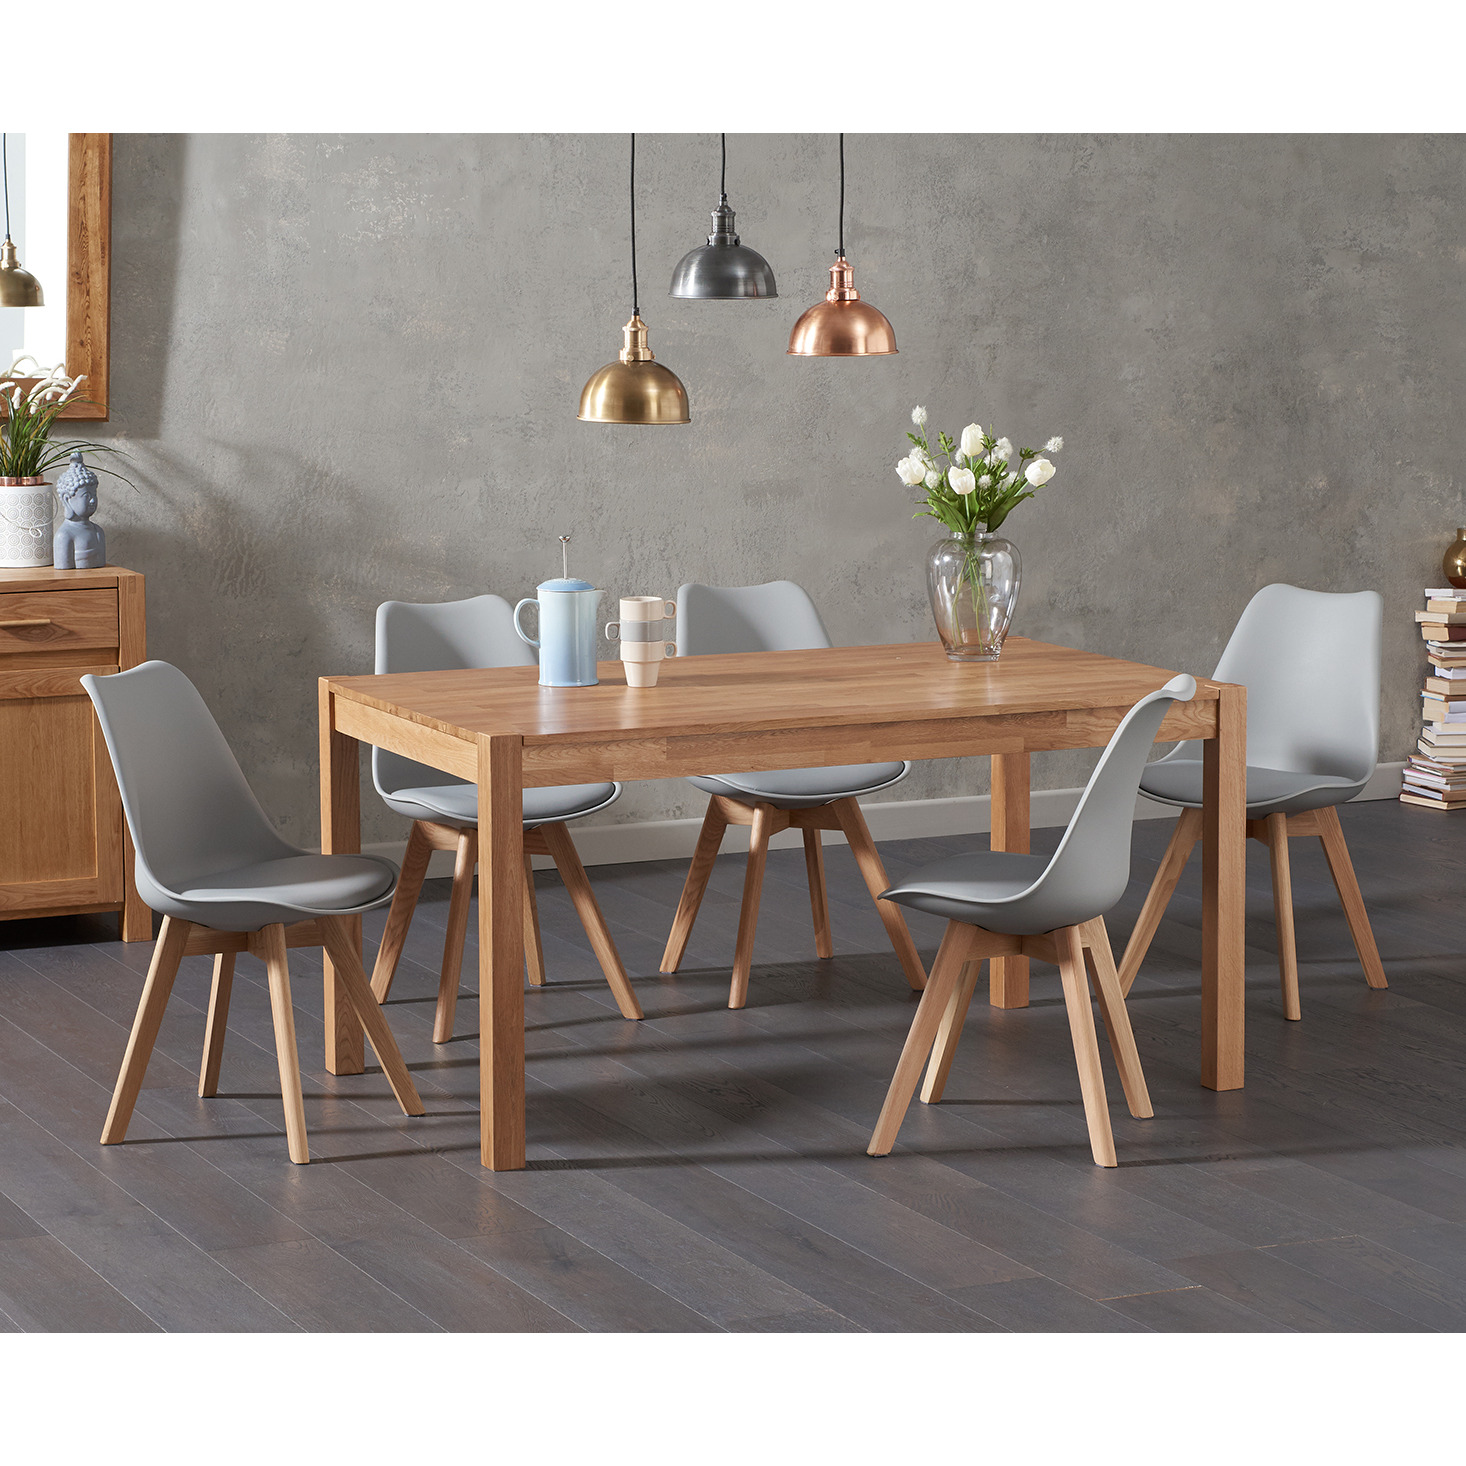 York 150cm Solid Oak Dining Table With 6 White Orson Faux Leather Chairs